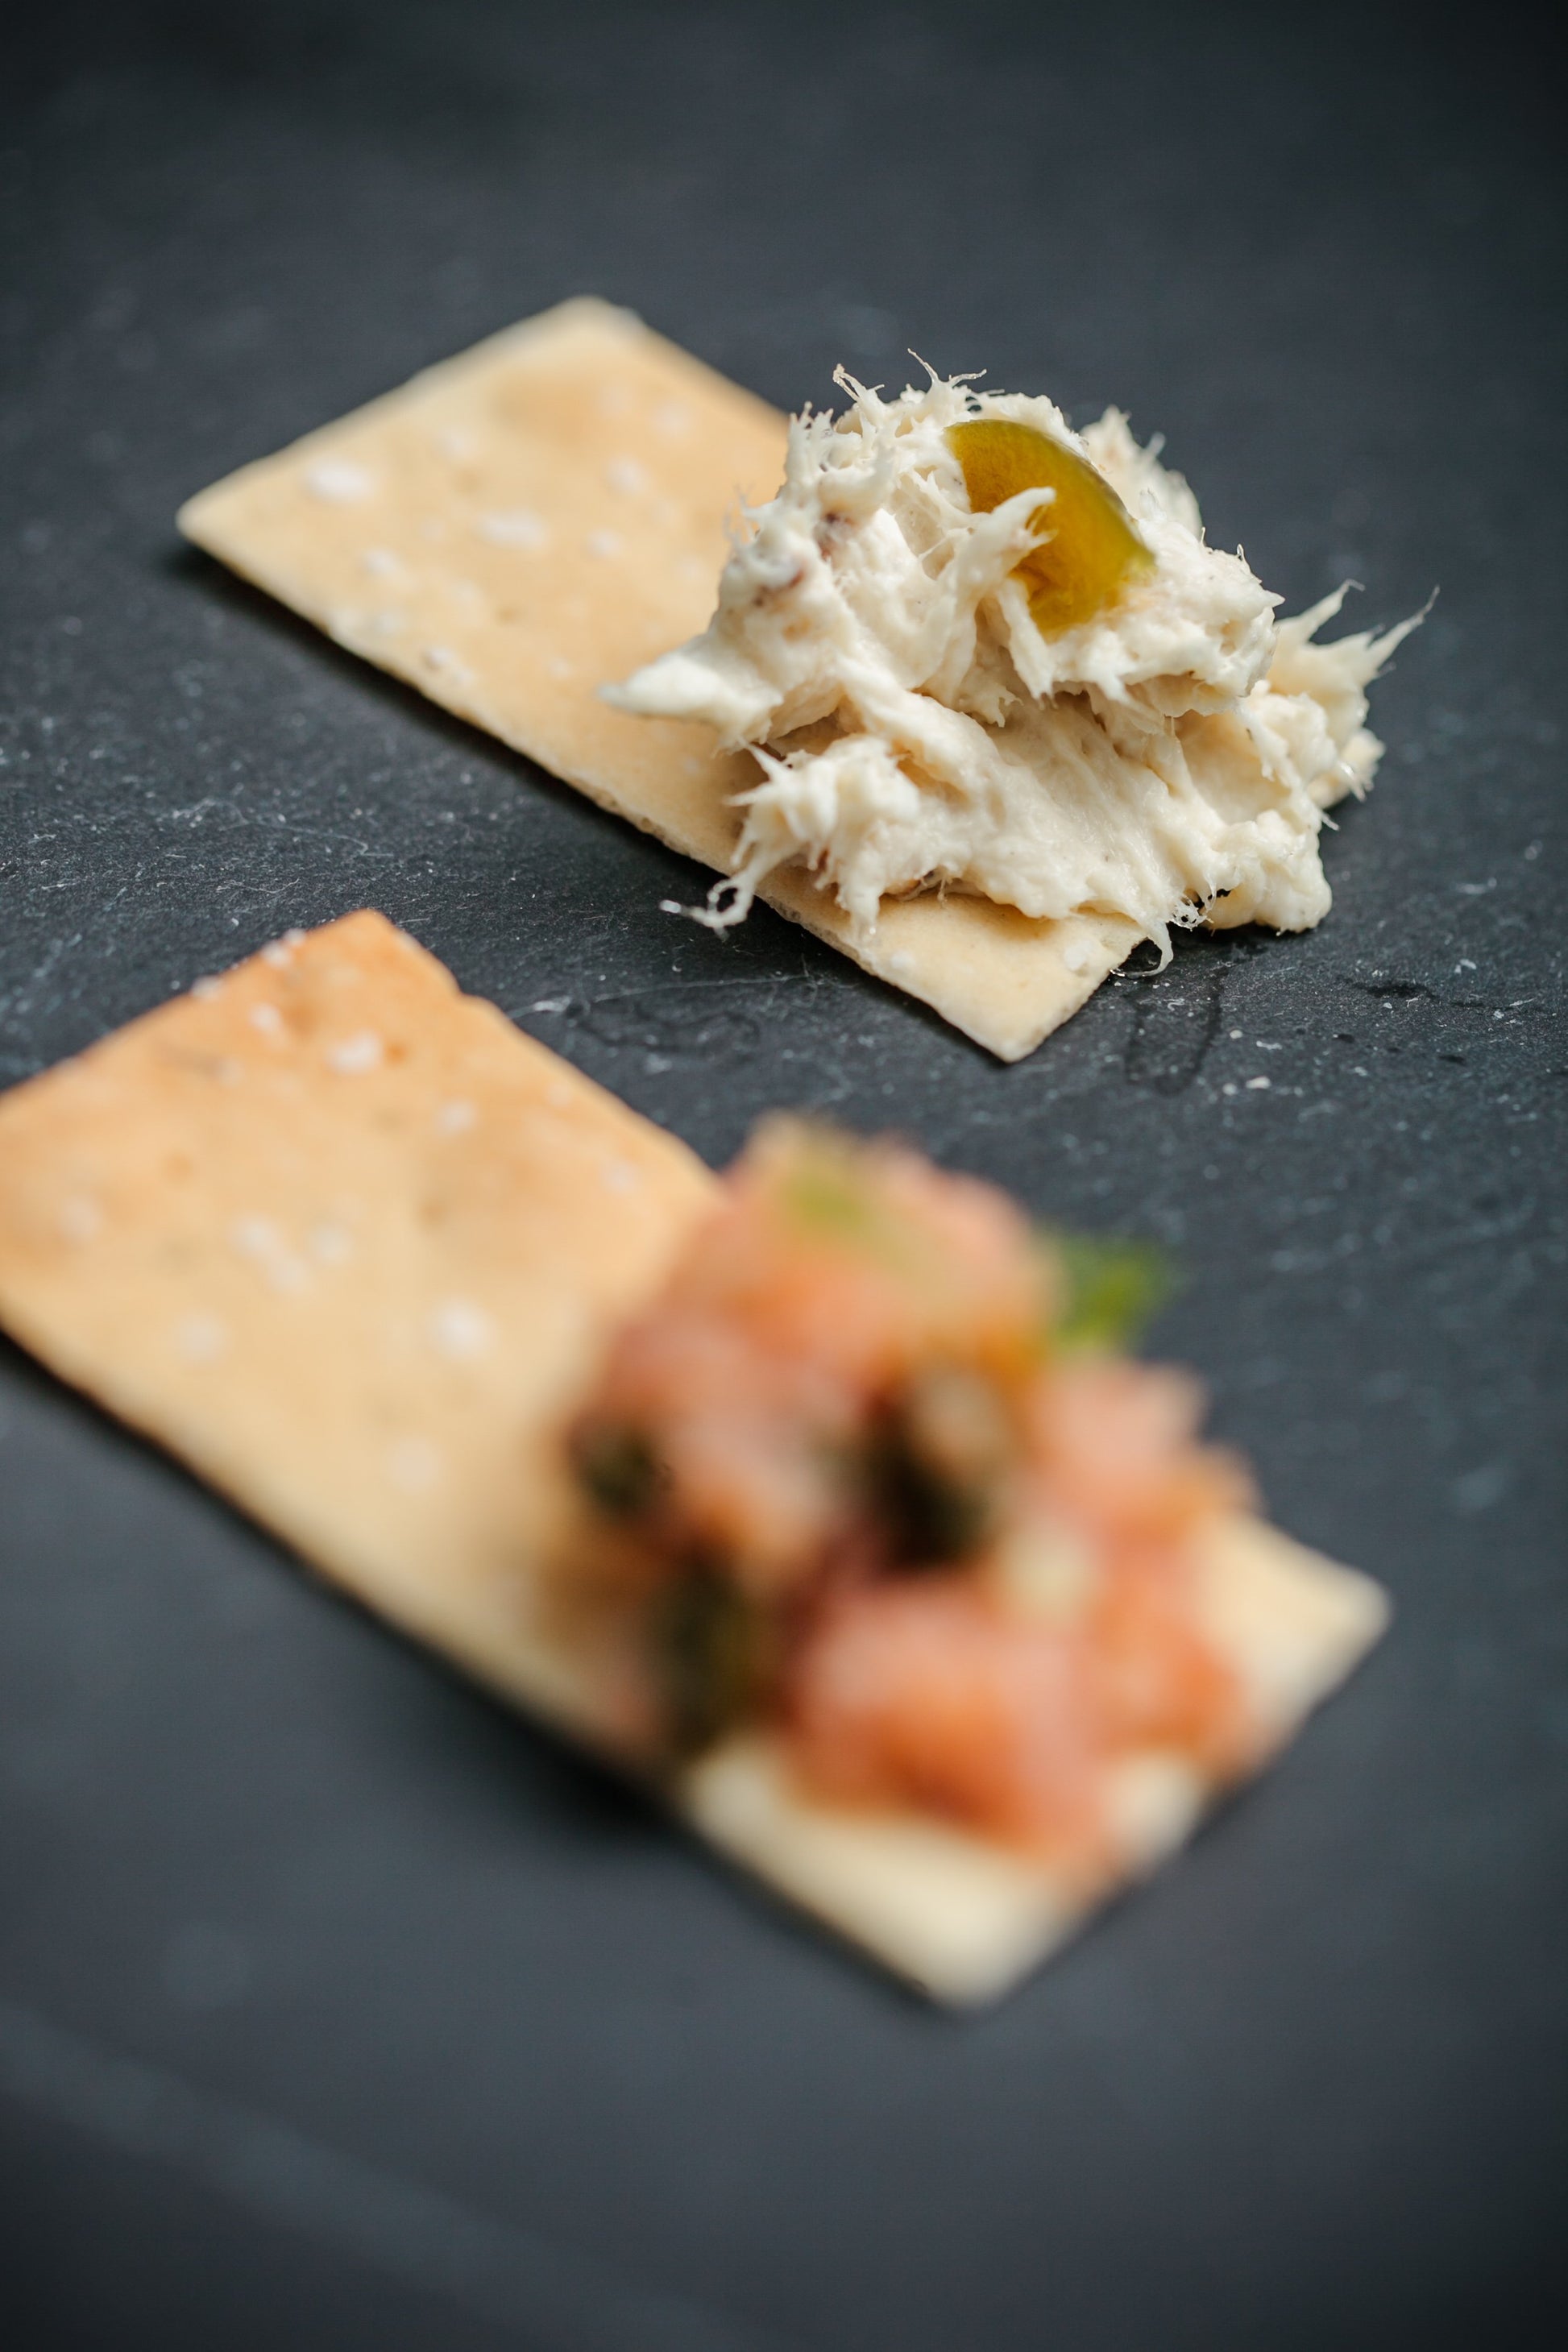 one cracker with salmon tartare and the other cracker with Fjord dip